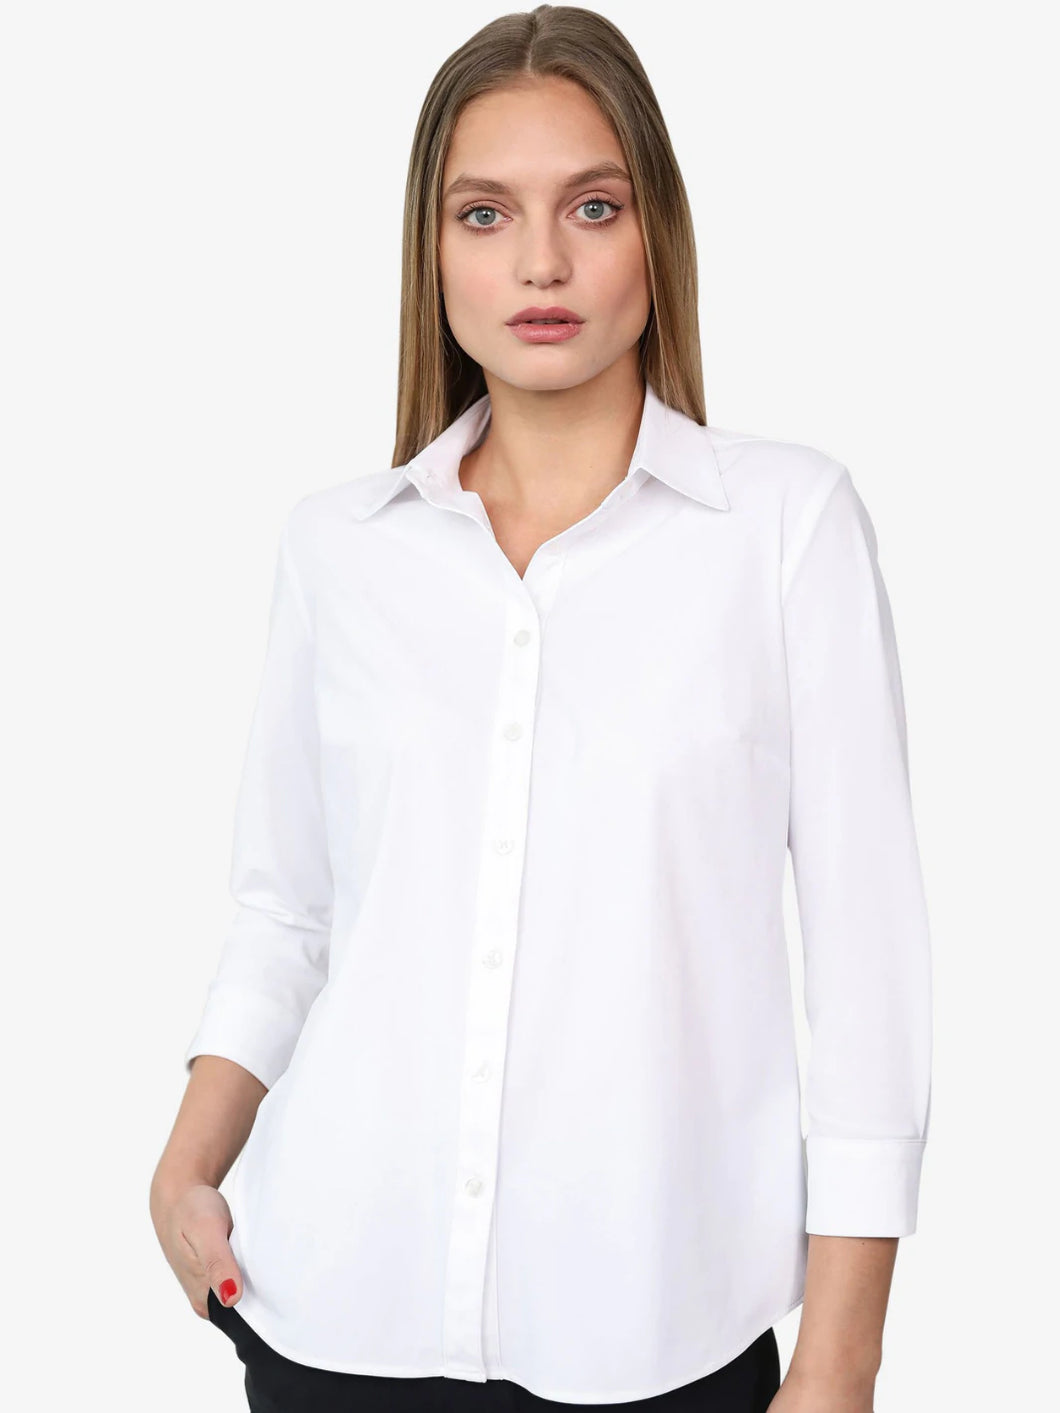 The Diane Blouse in white by Ameliora